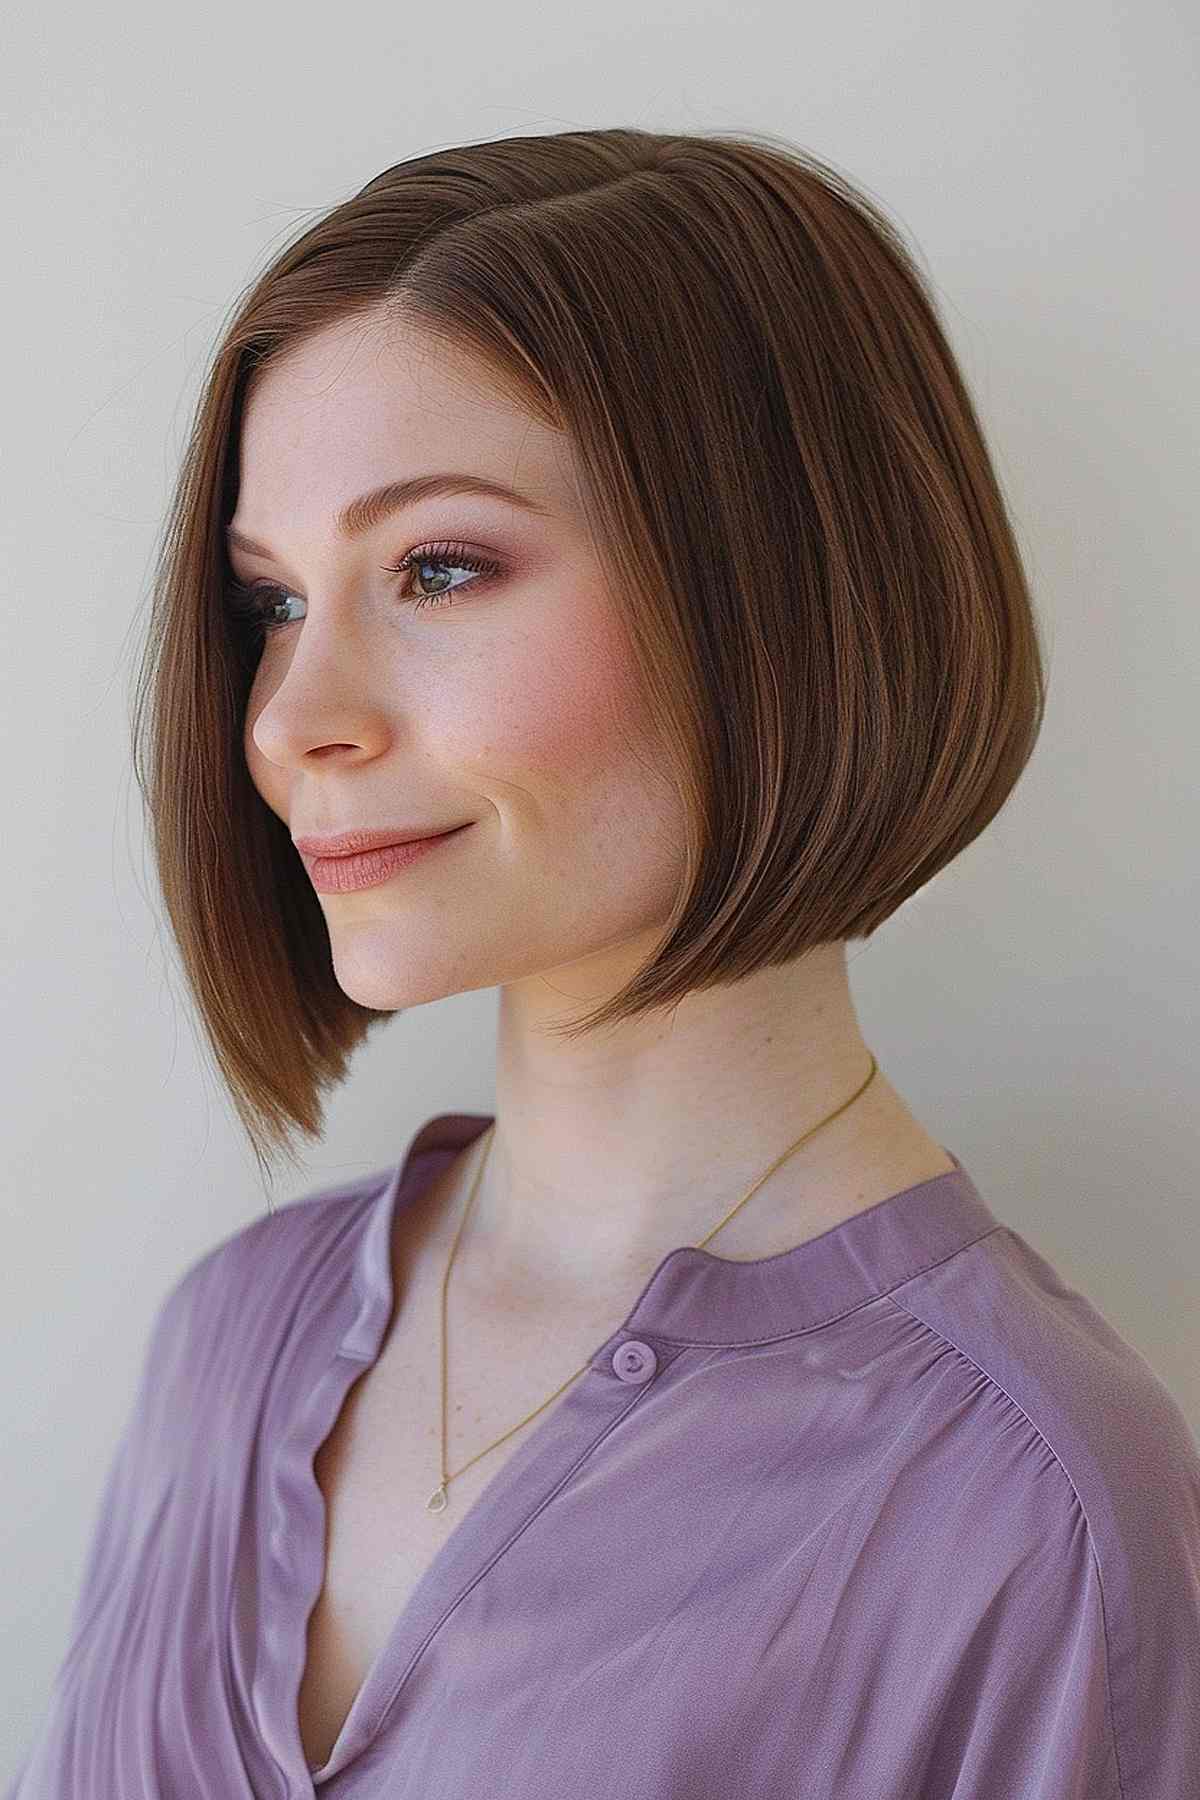 A softly layered, chin-length graduated bob gives a sophisticated and polished look.